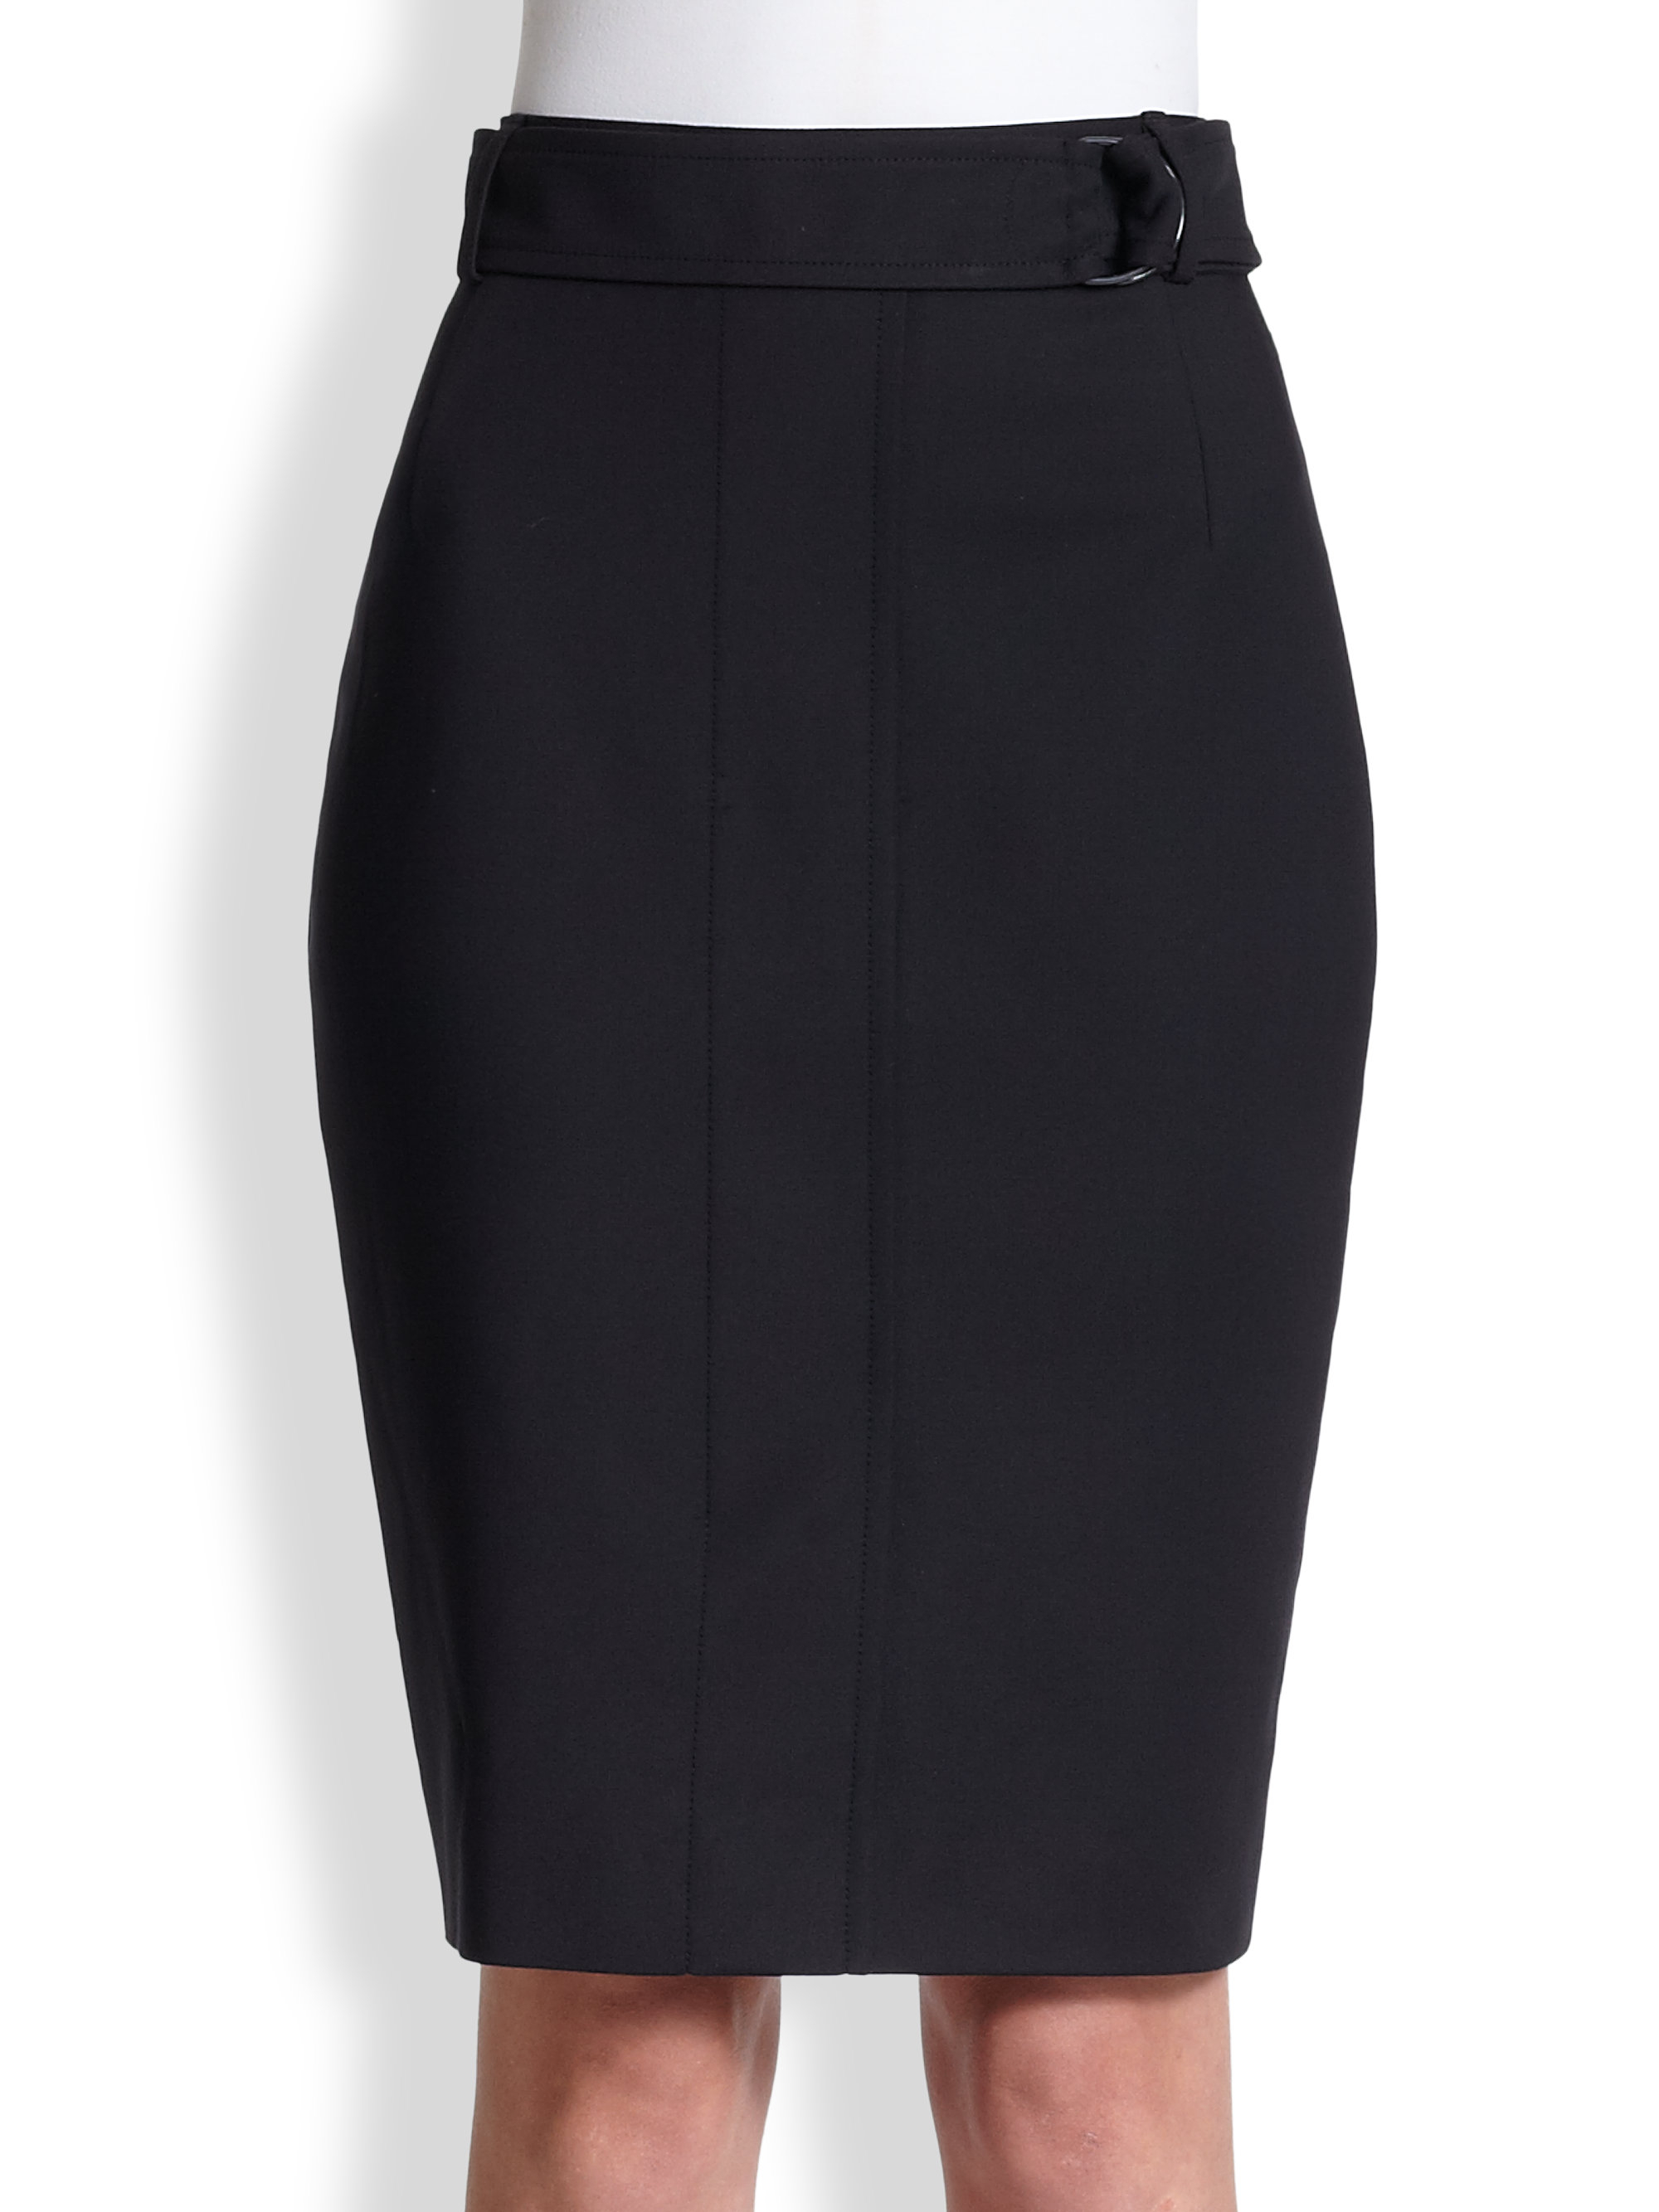 Akris punto Belted Techno Pencil Skirt in Black | Lyst